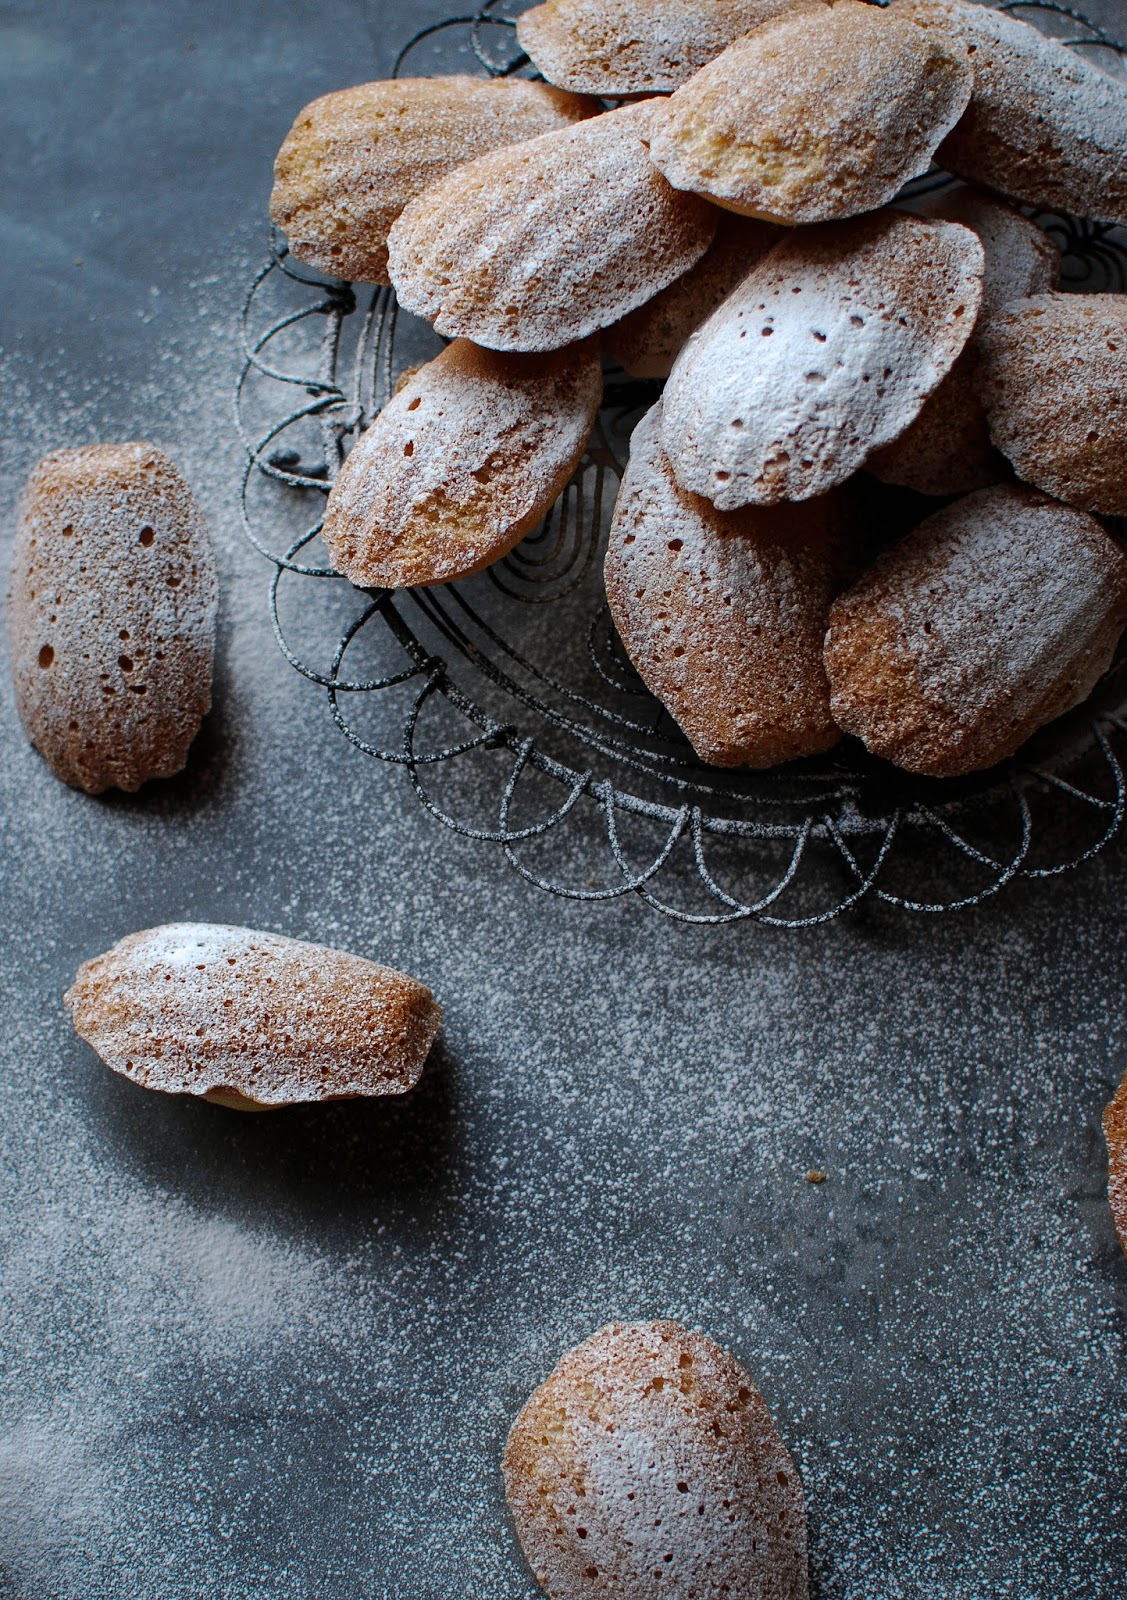 Lemon Madeleines, delicate shell shaped tea cakes perfect for dipping in your cuppa.